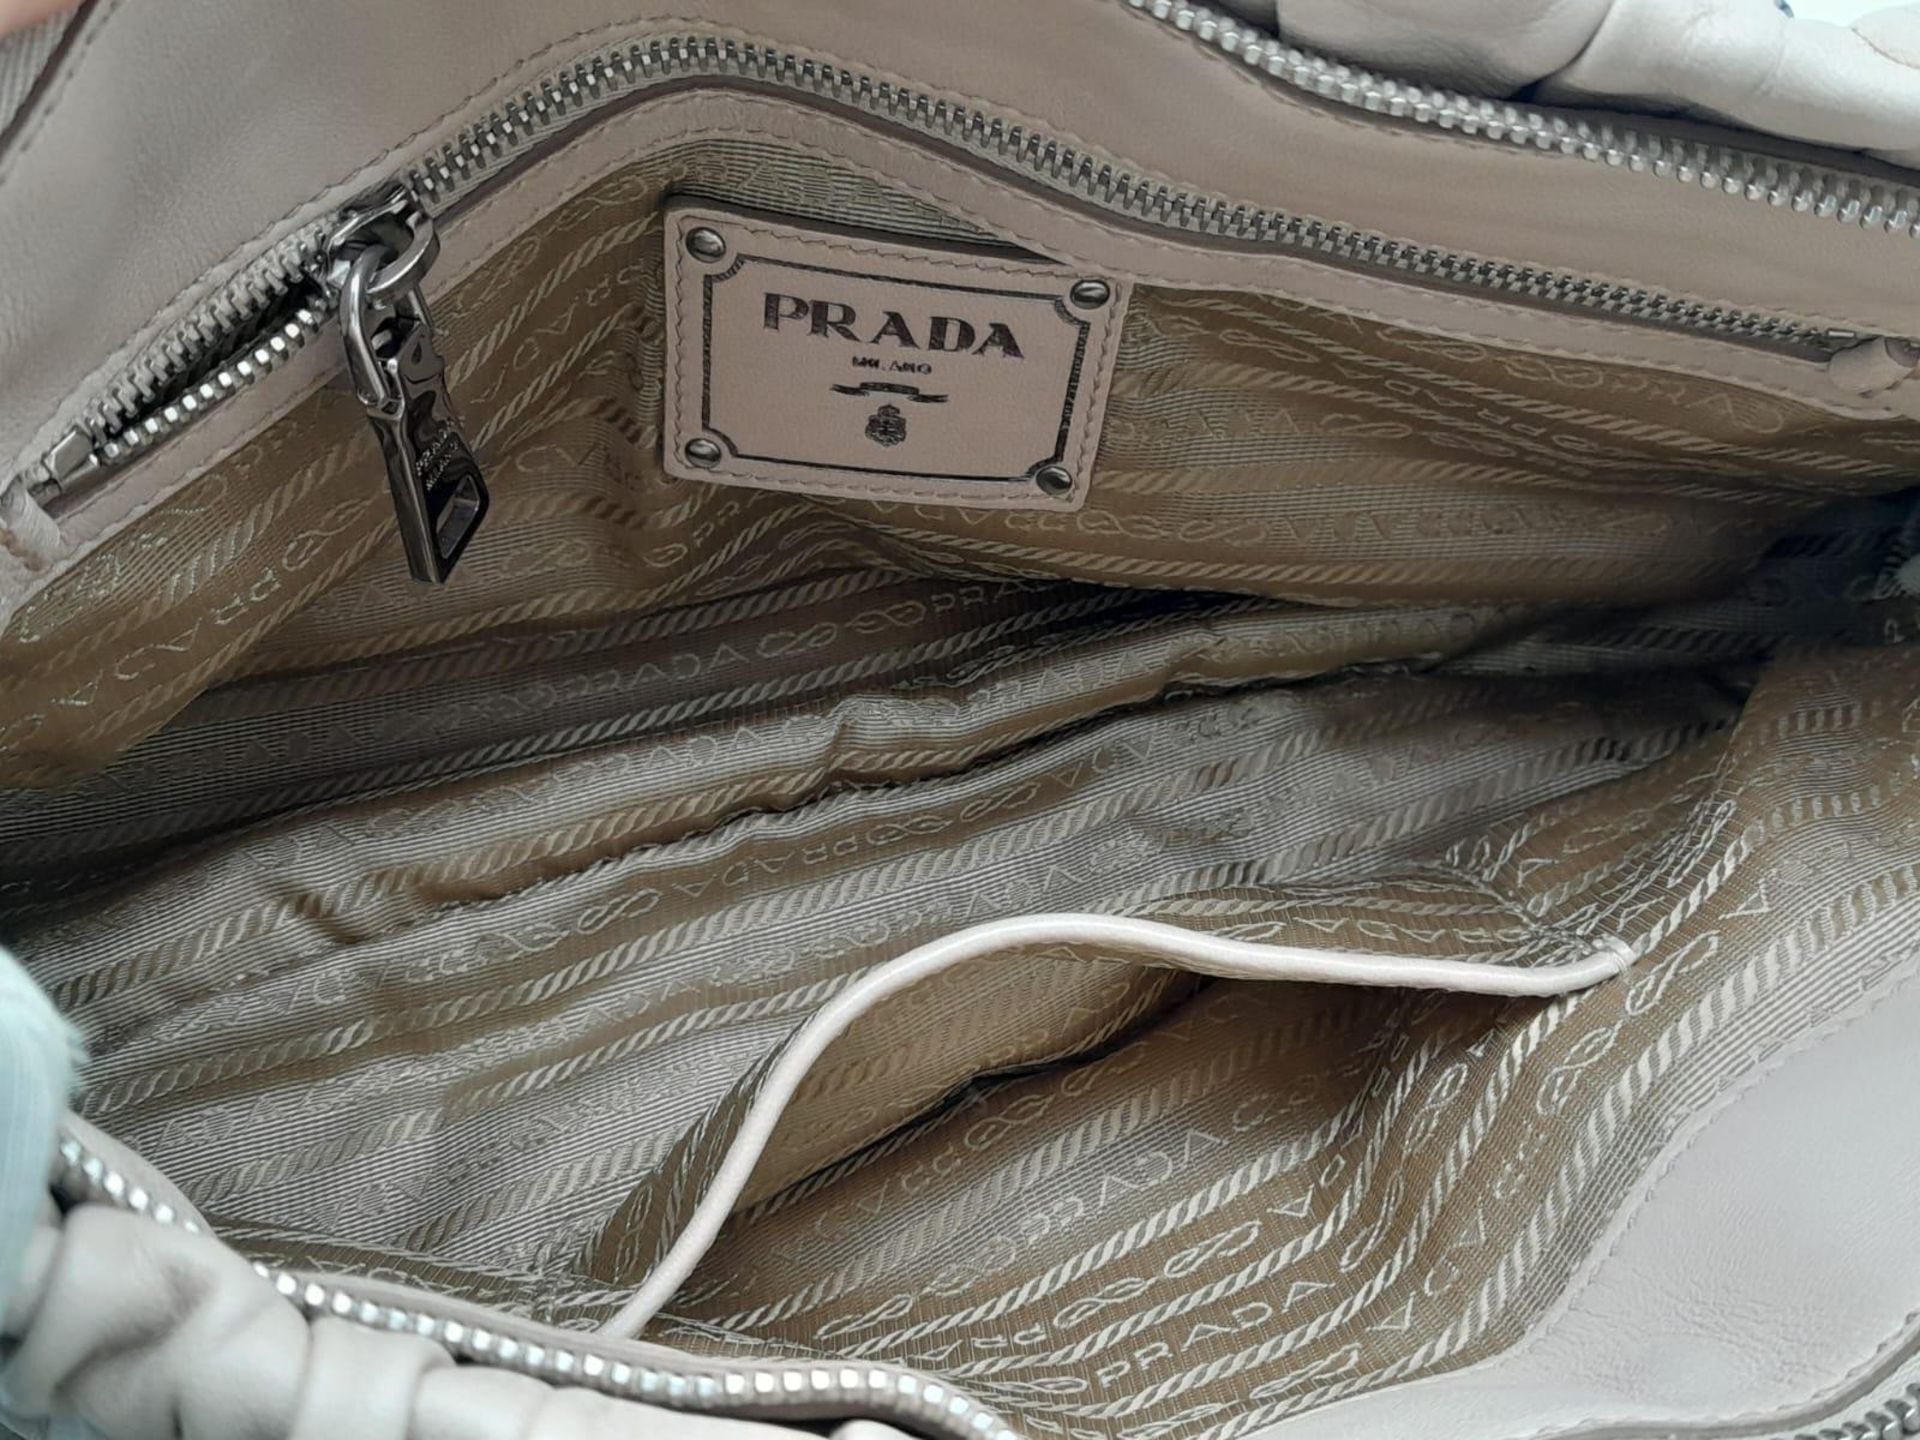 A PRADA BEIGE NAPPA LEATHER GAUFRE POMICE TOTE BAG. SILVER TONE HARD WEAR INCLUDING BUCKLE DETAIL. - Image 13 of 27